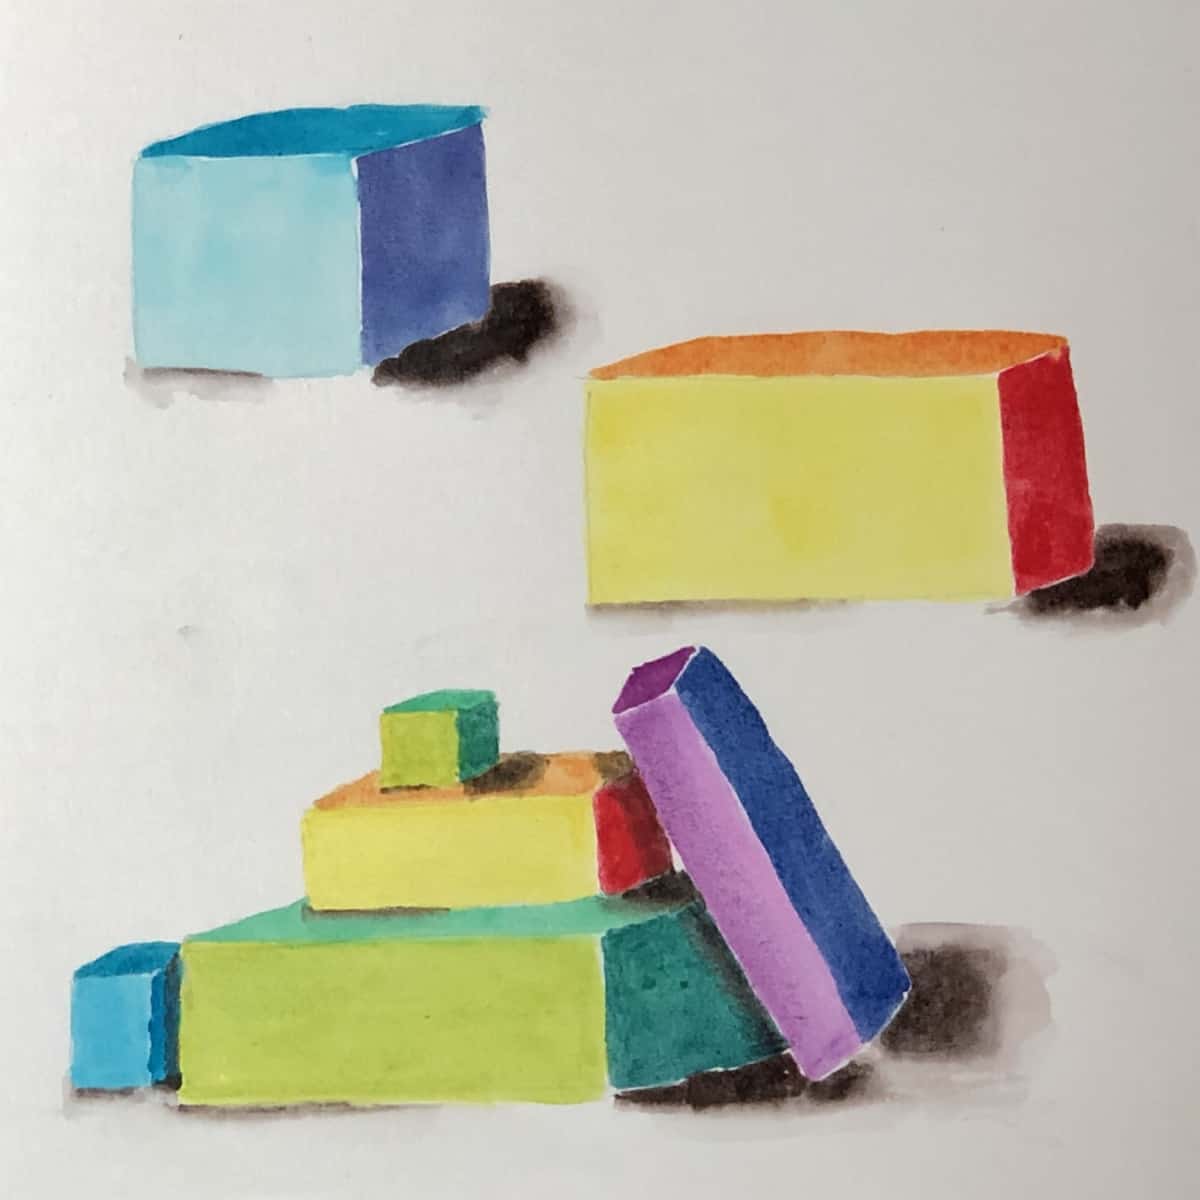 Watercolor painting of boxes and cubes